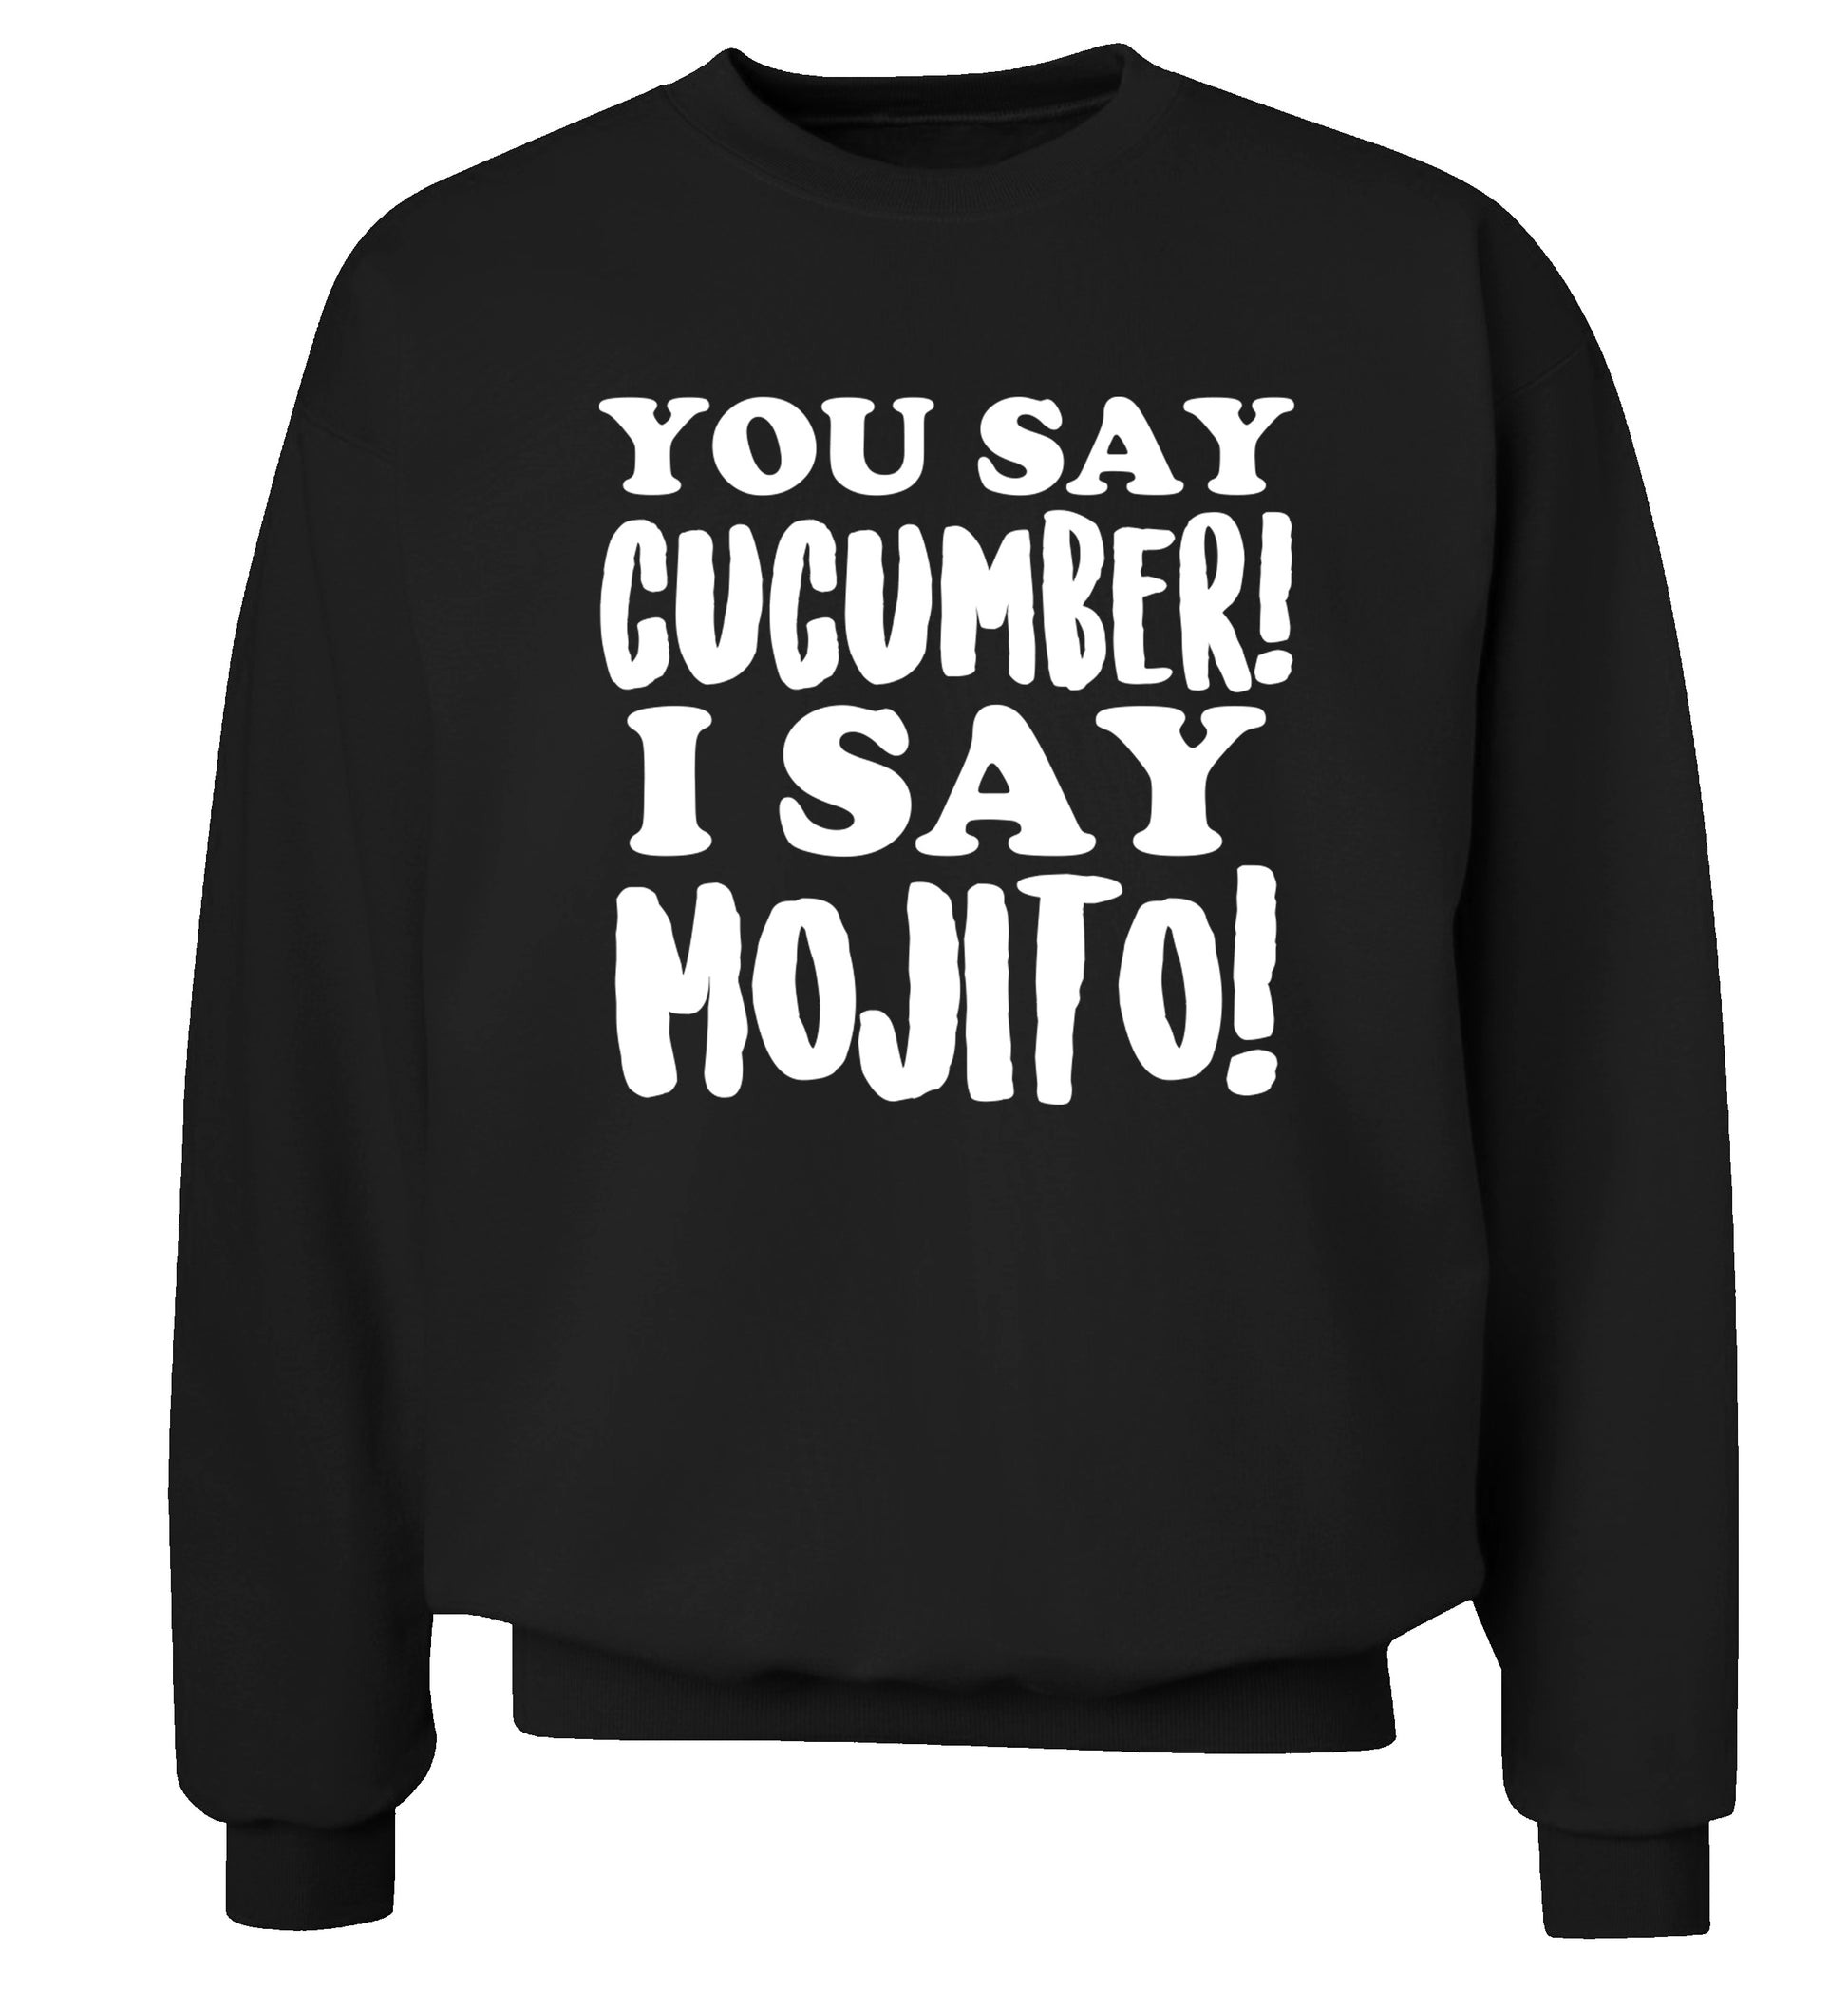 You say cucumber I say mojito! Adult's unisex black Sweater 2XL